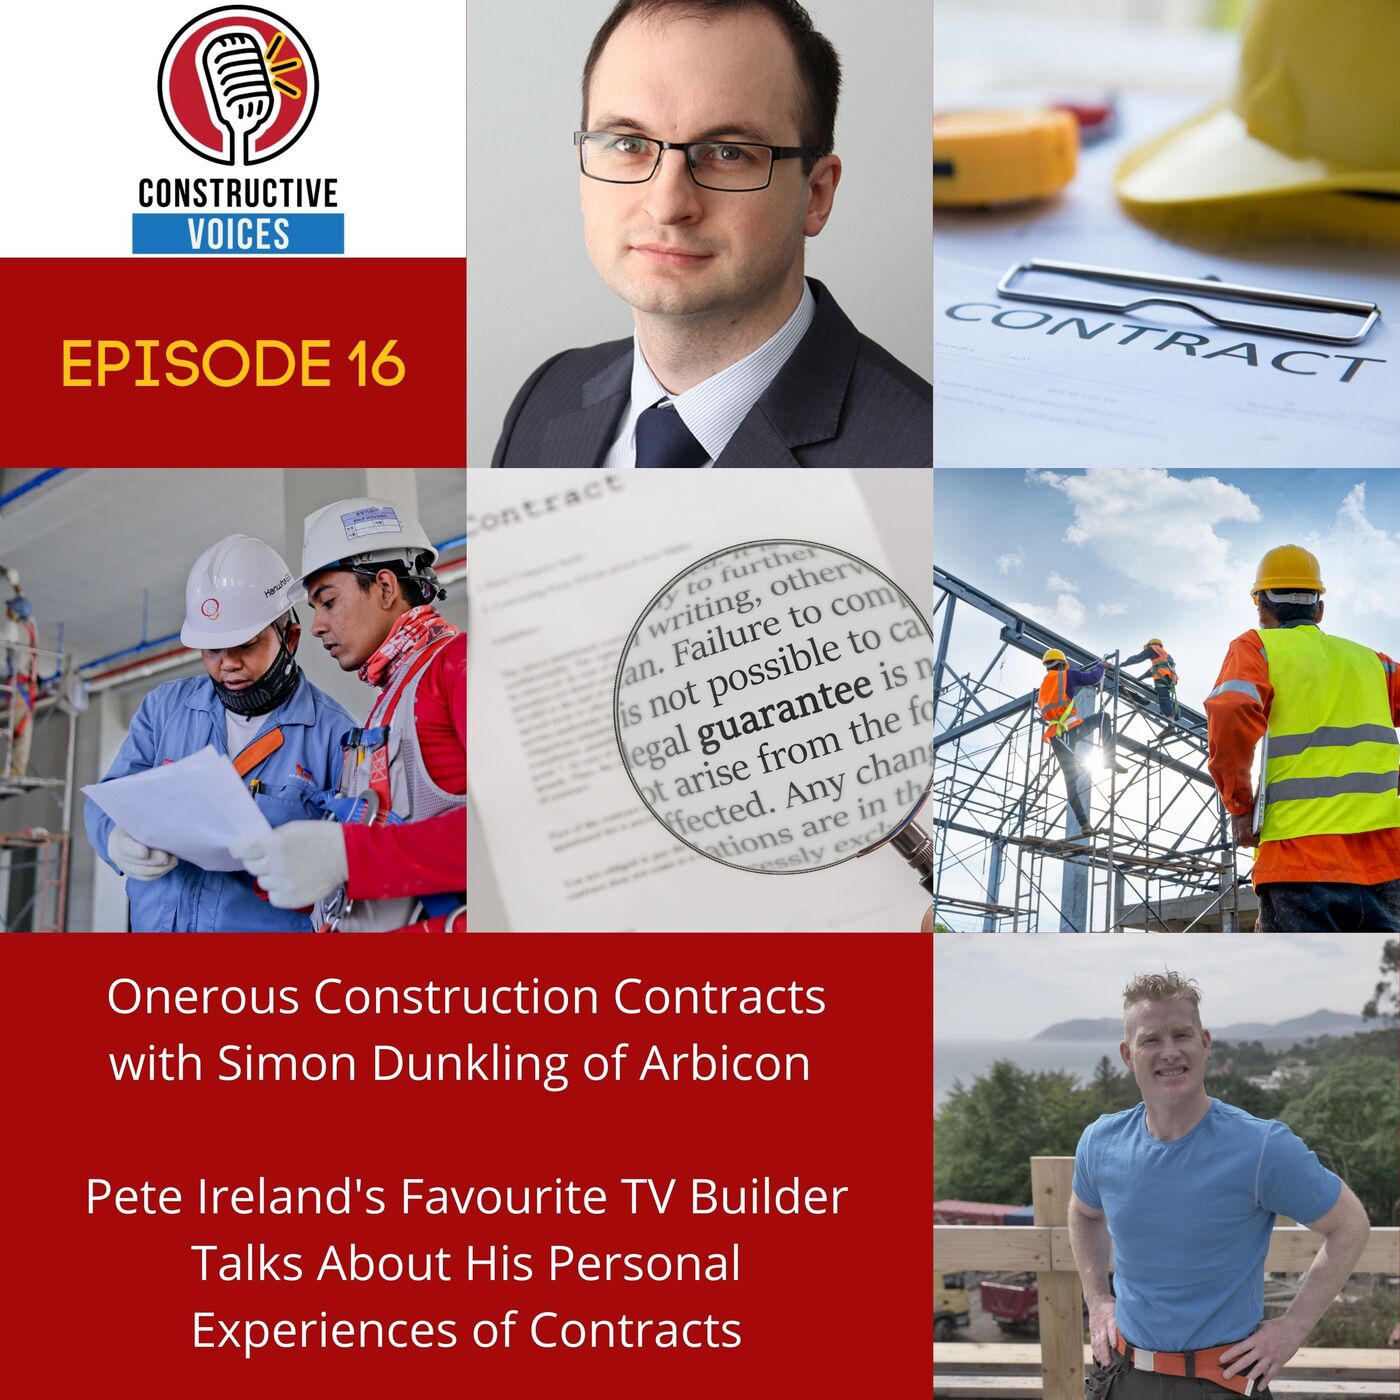 Onerous Construction Contracts with Simon Dunkling of Arbicon. Pete Talks About His Personal Experiences of Contracts.